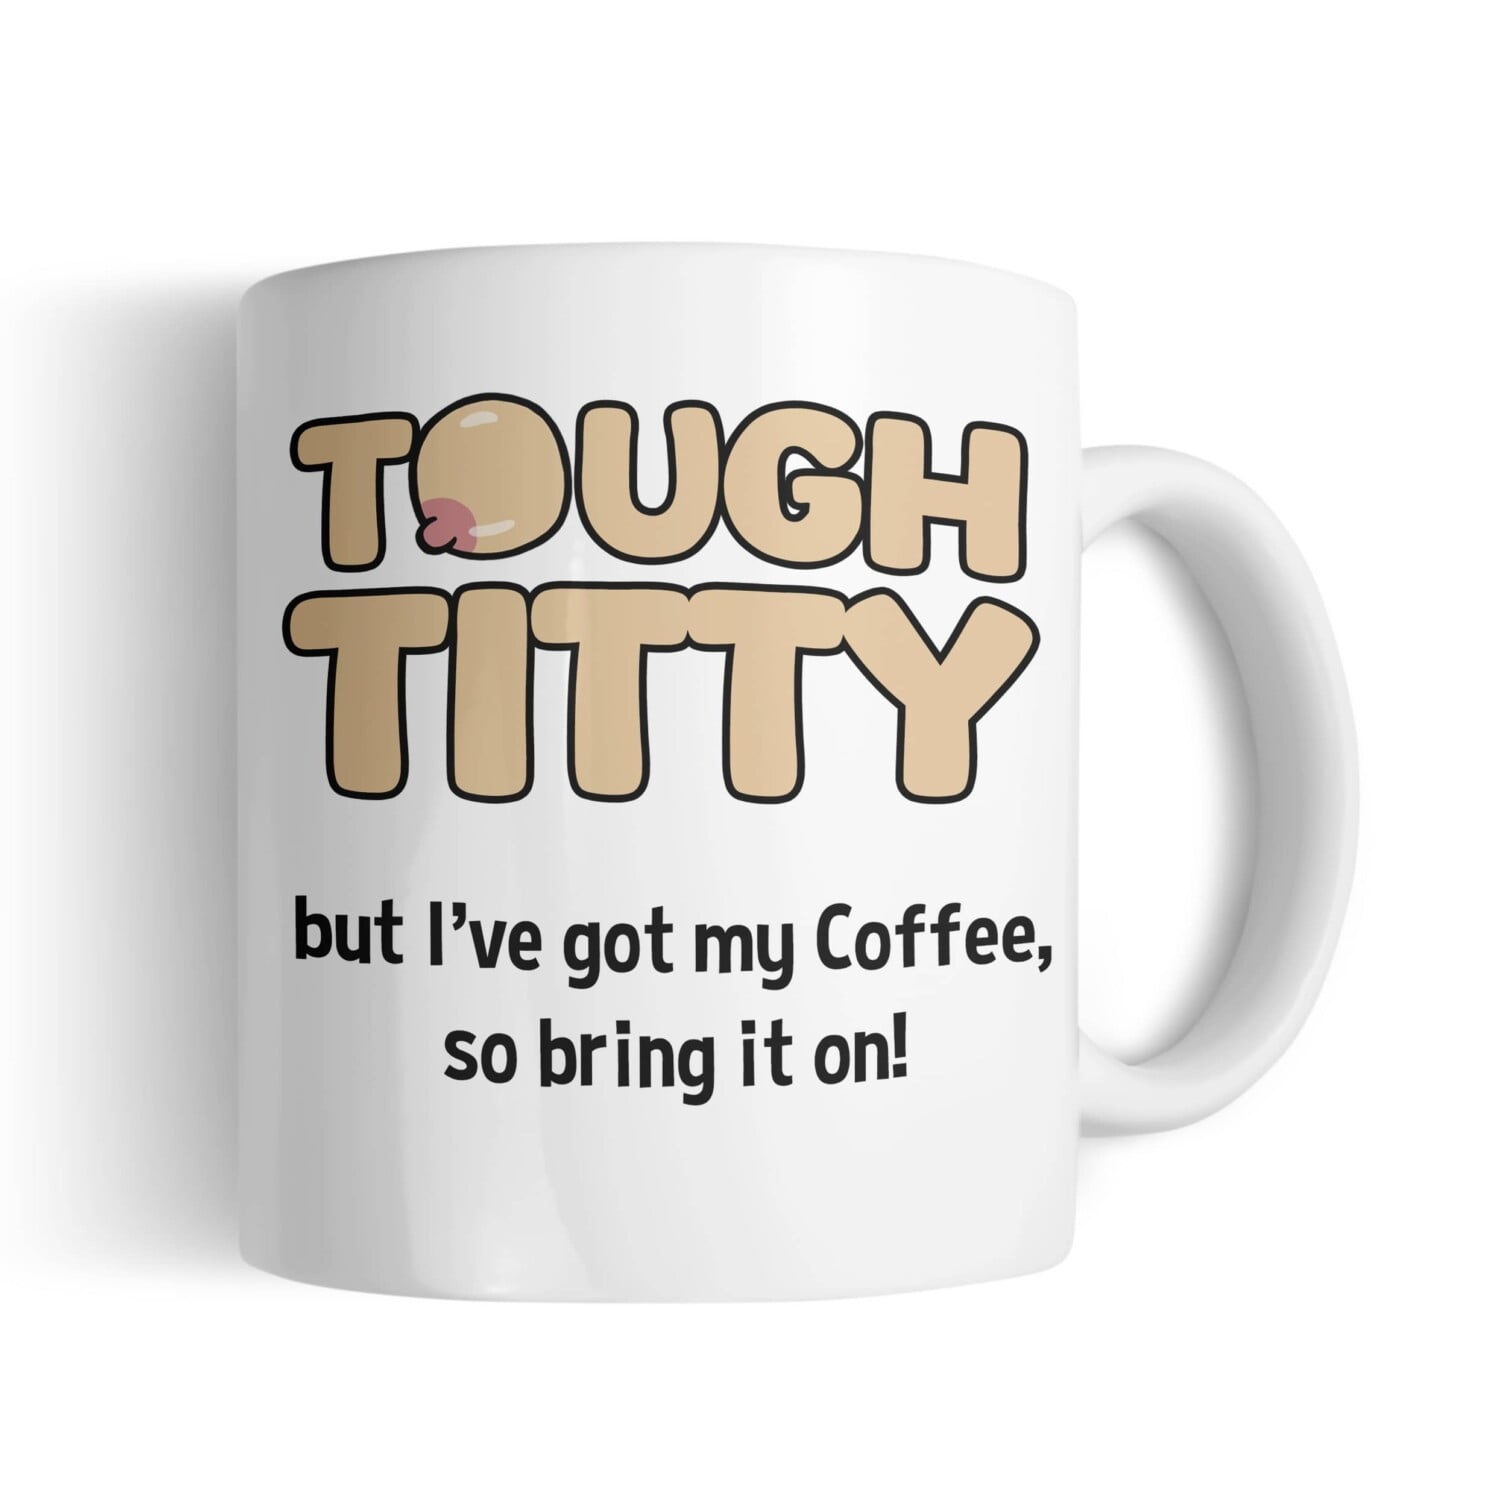 Funny Tough Titty Mug, Printing in County Monaghan, Ireland by Design Gaff